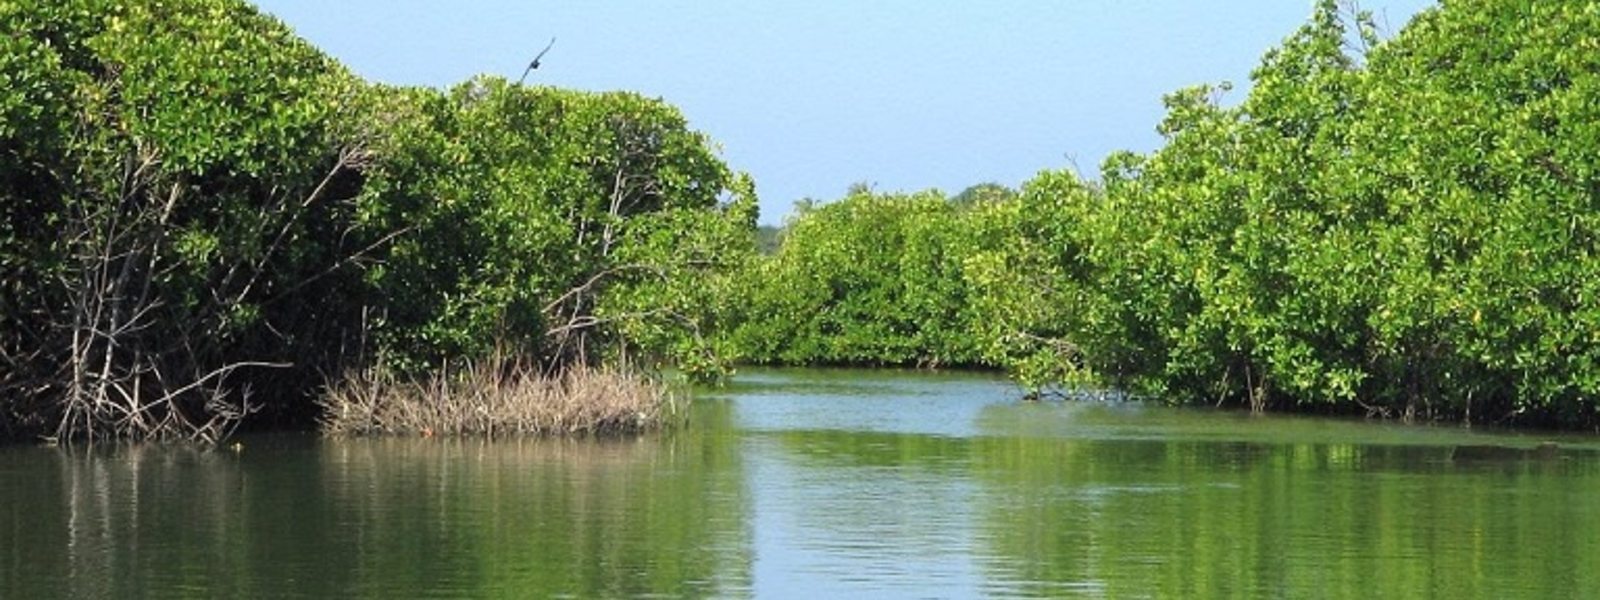 Rs. 100 Mn for Muthurajawela Wetlands protection